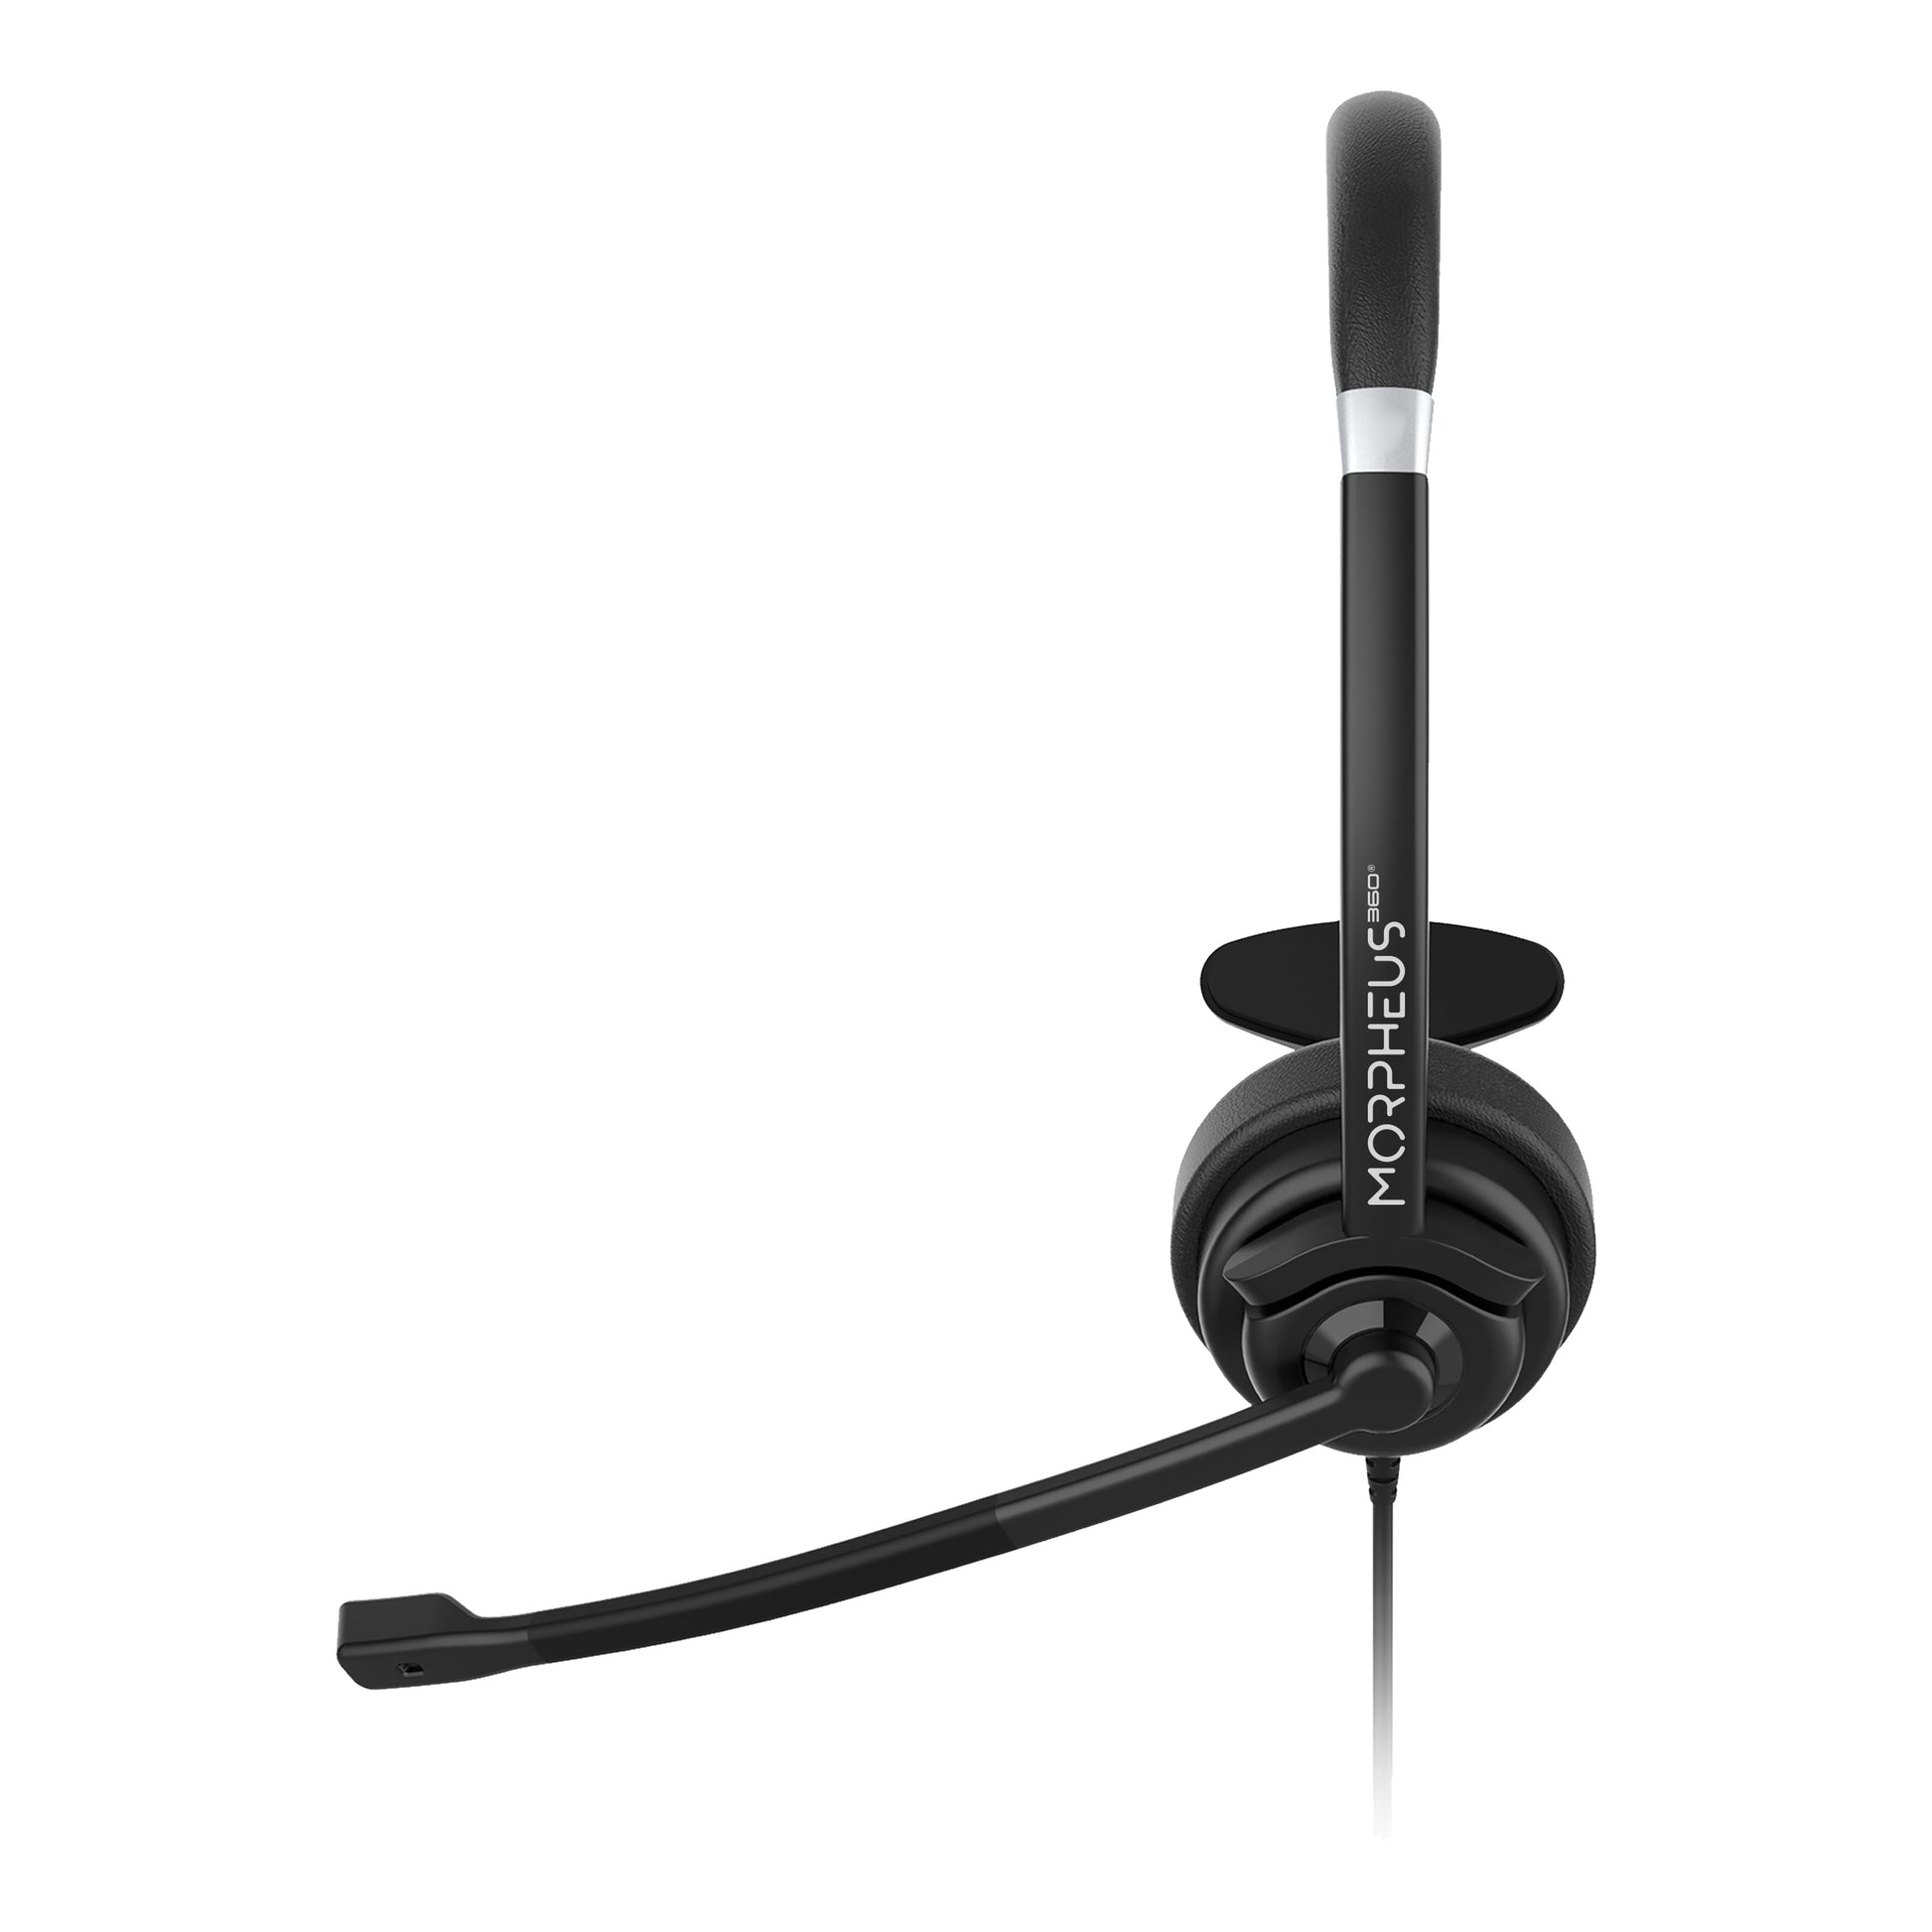 Left profile image of the Connect USB Mono Headset with Boom Microphone.